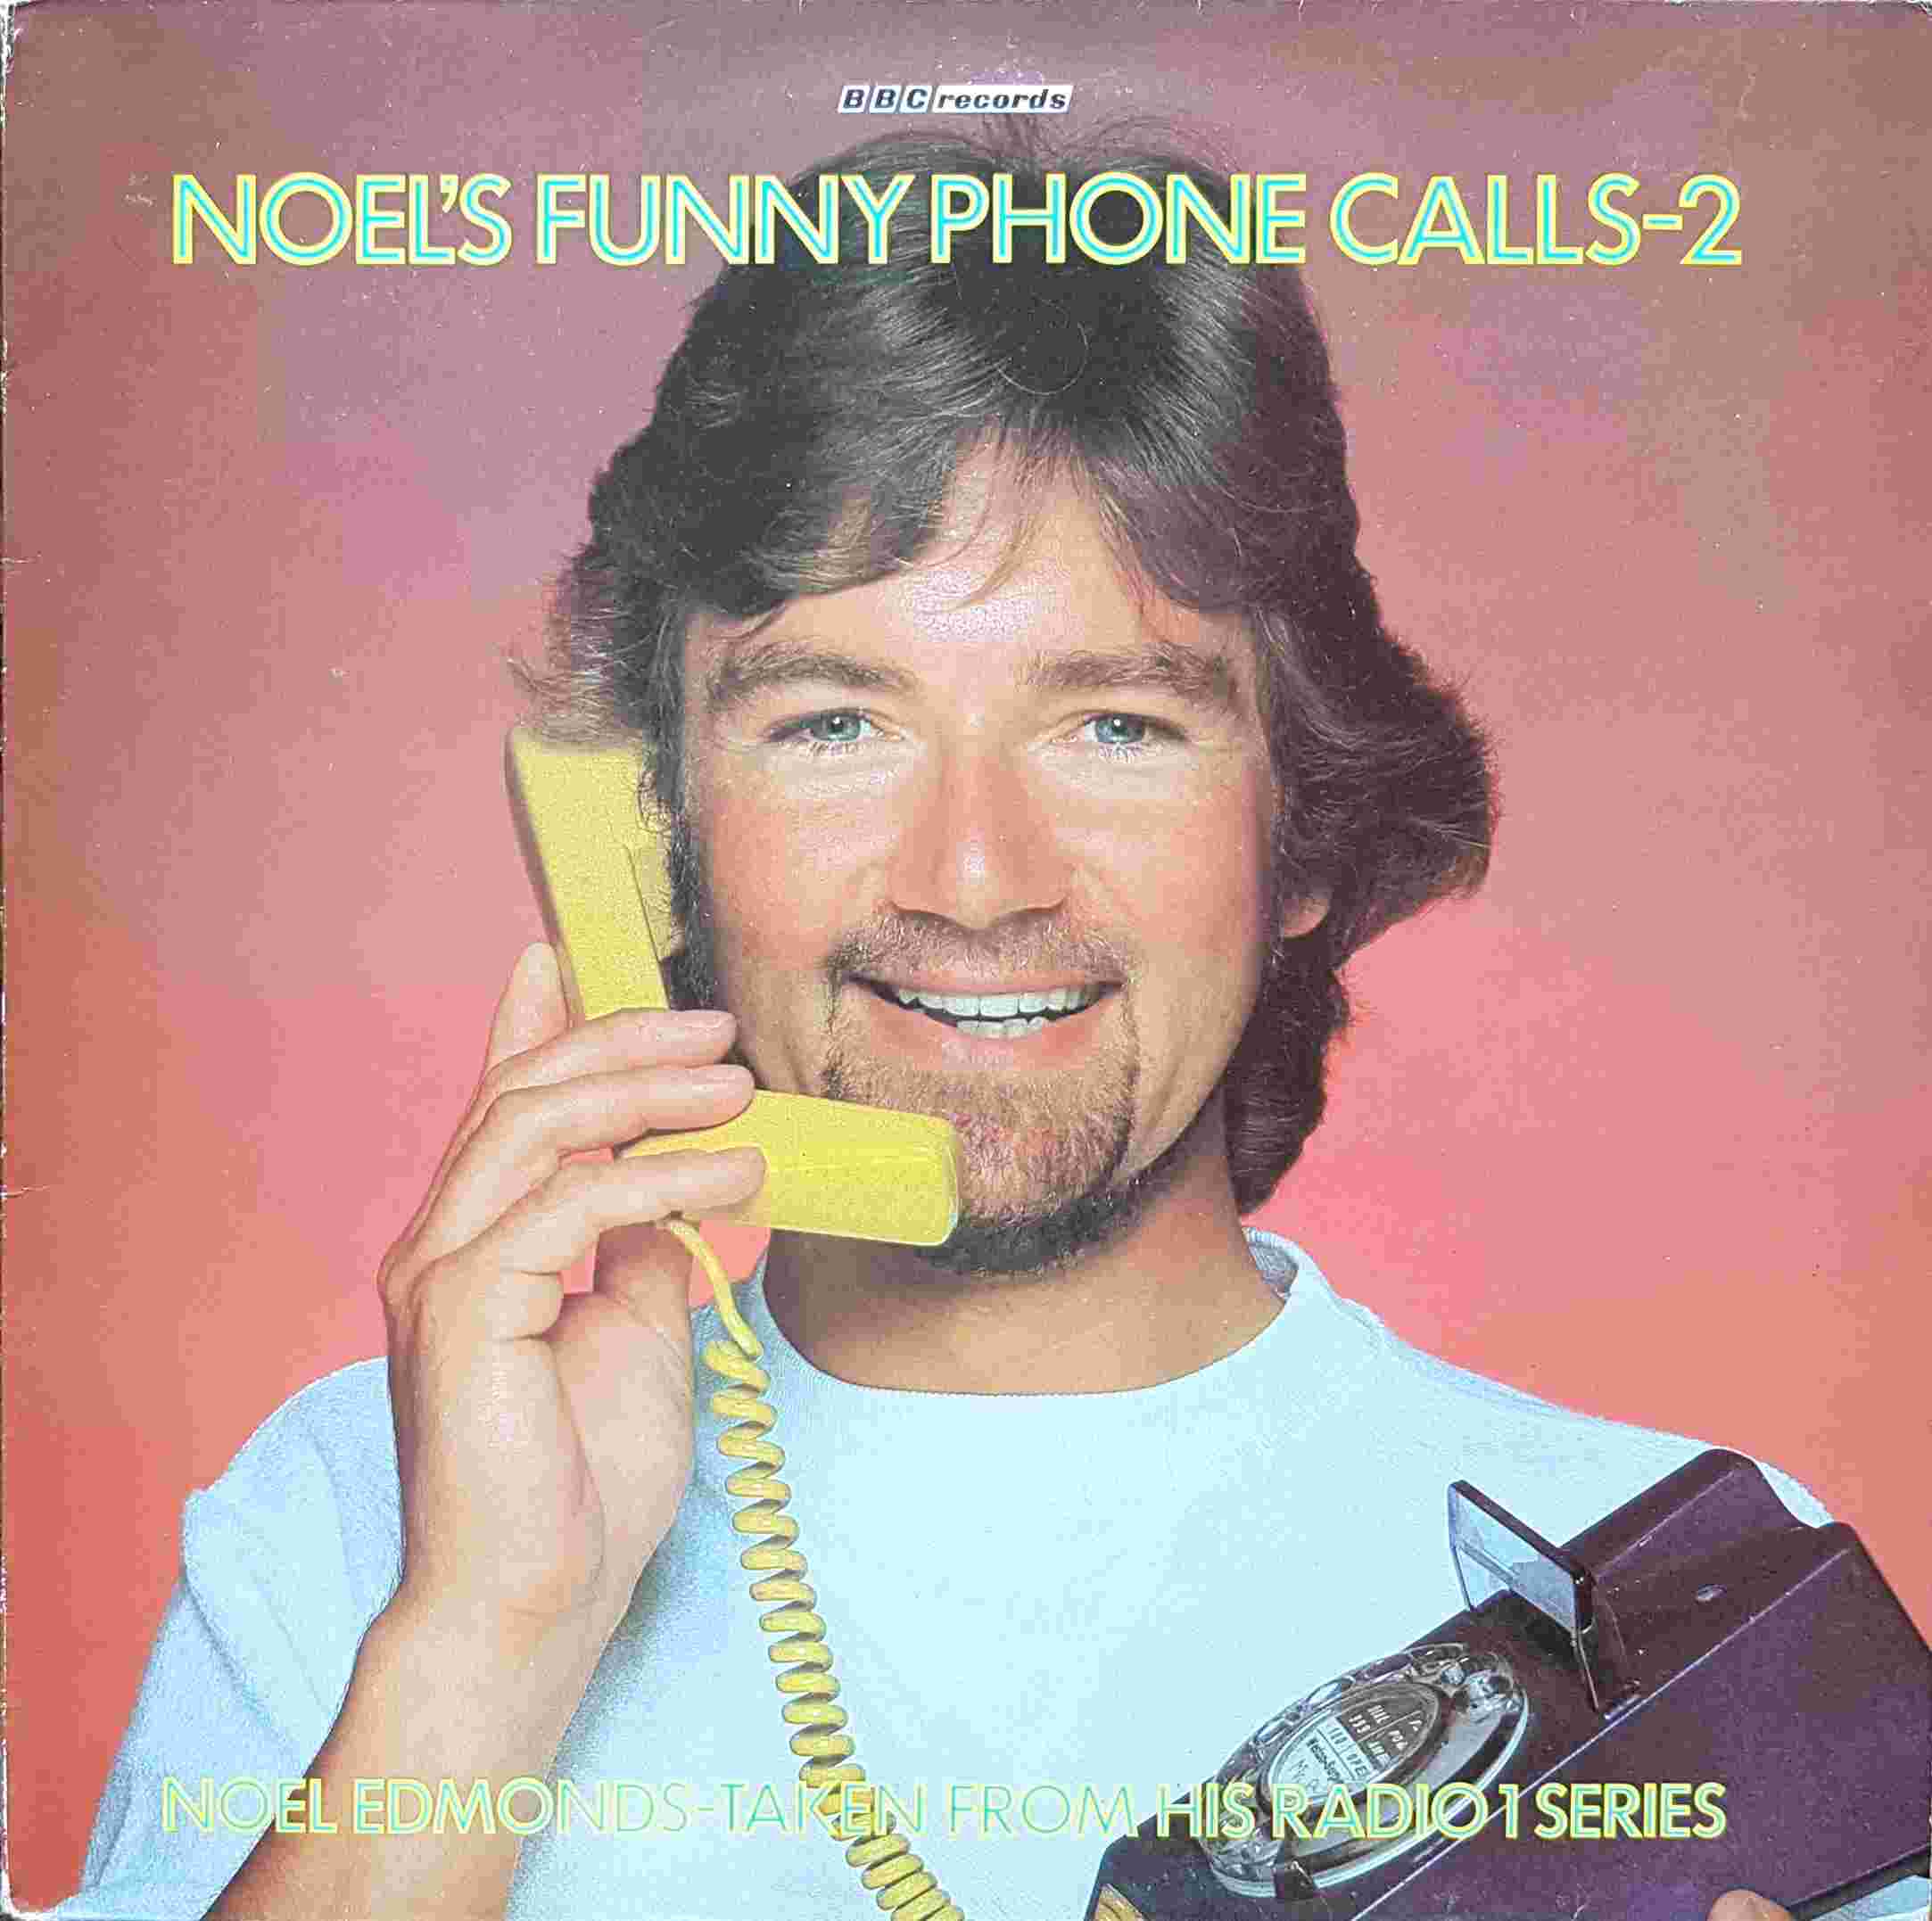 Picture of REC 456 Noel's funny phone calls - Volume 2 by artist Noel Edmunds from the BBC records and Tapes library